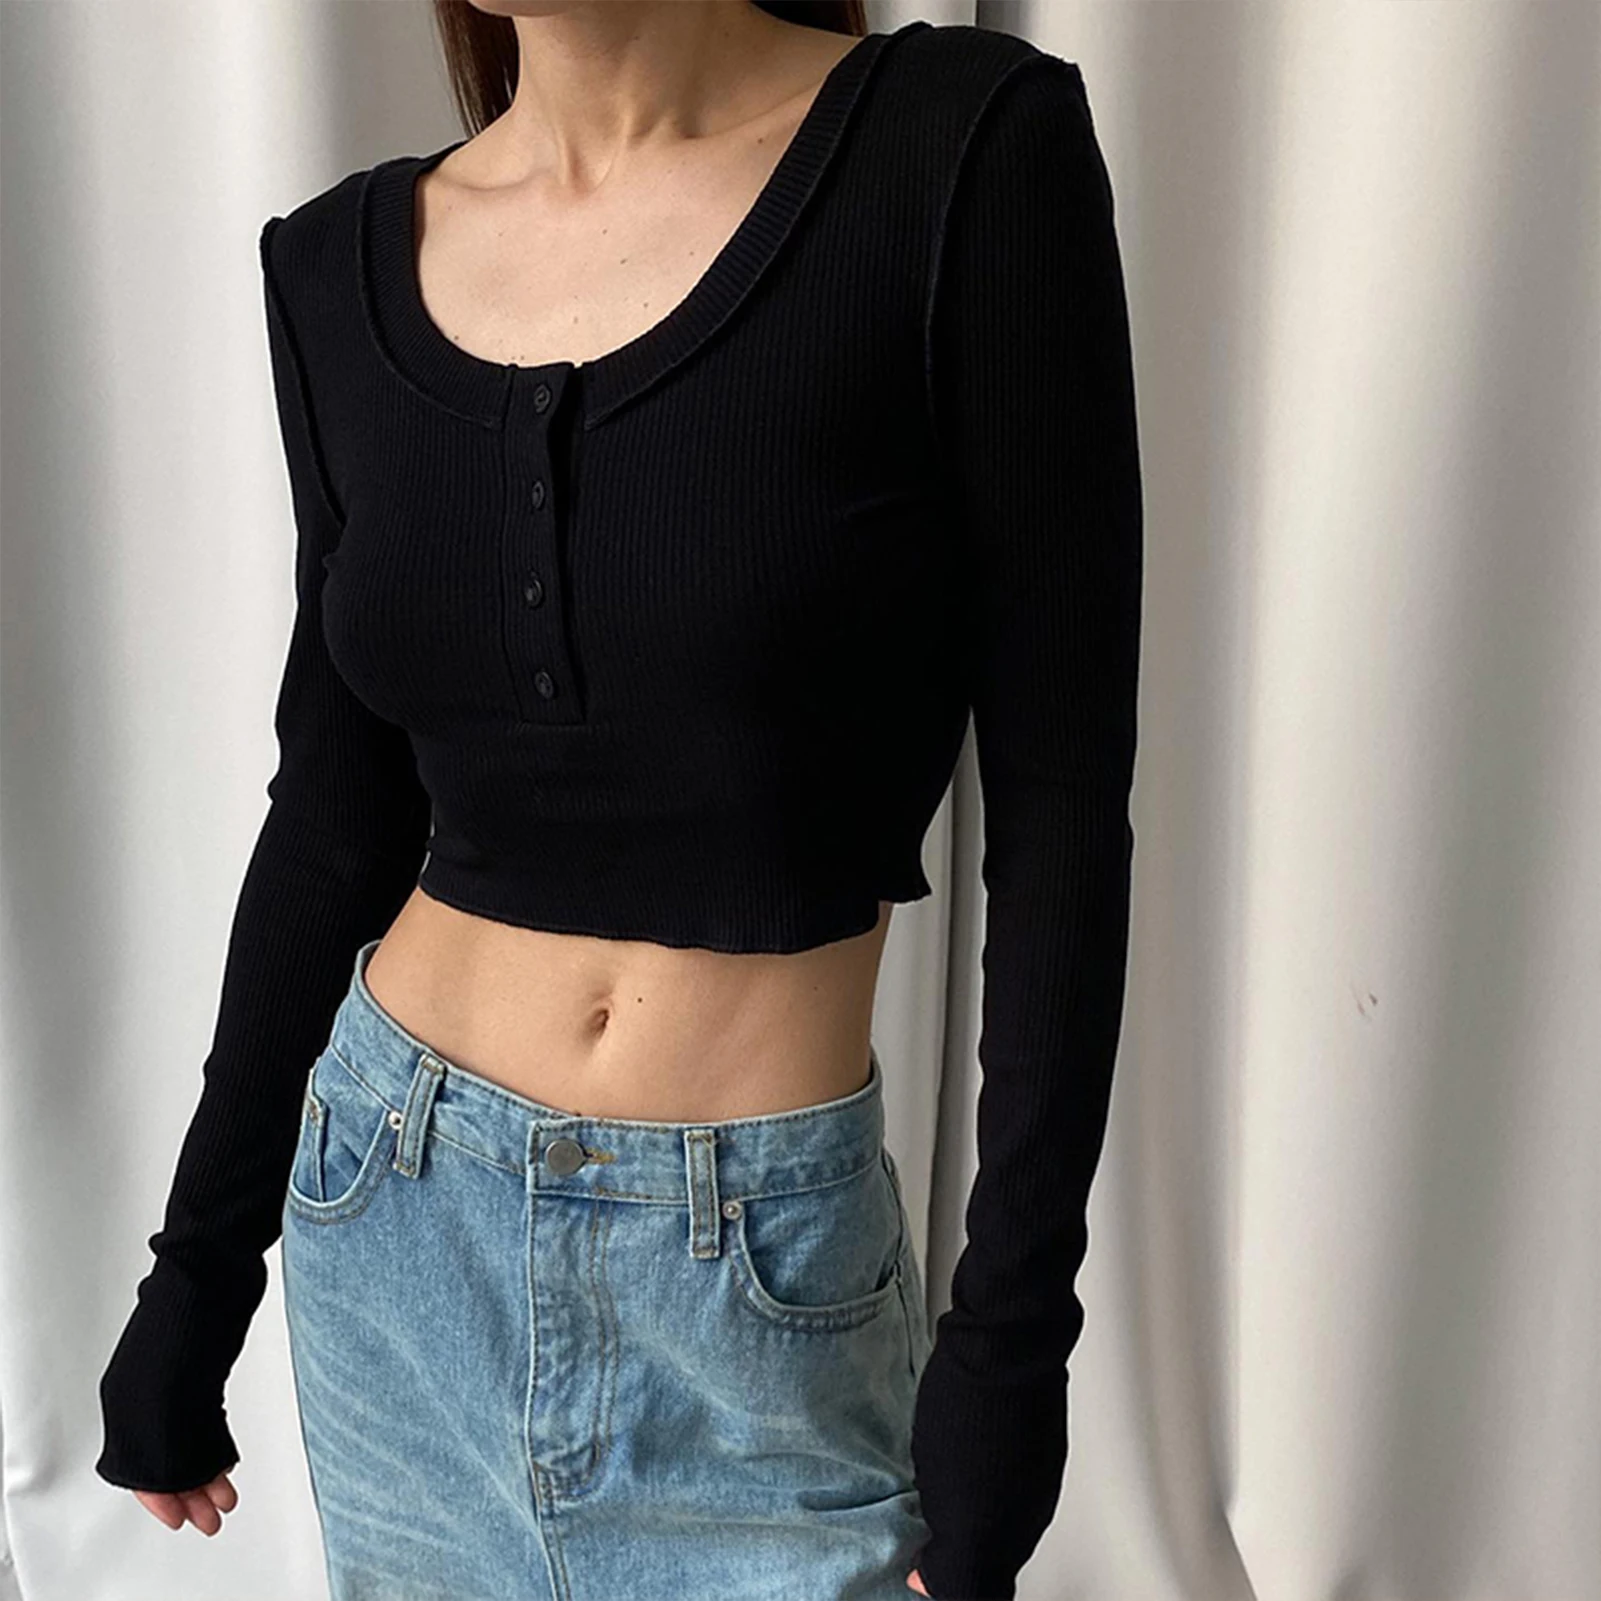 

Women Bodycon Top Navel Exposed Ladies Summer Casual Top Crew Neck Solid Color Sexy Style Rib Knitted Streetwear Outfit